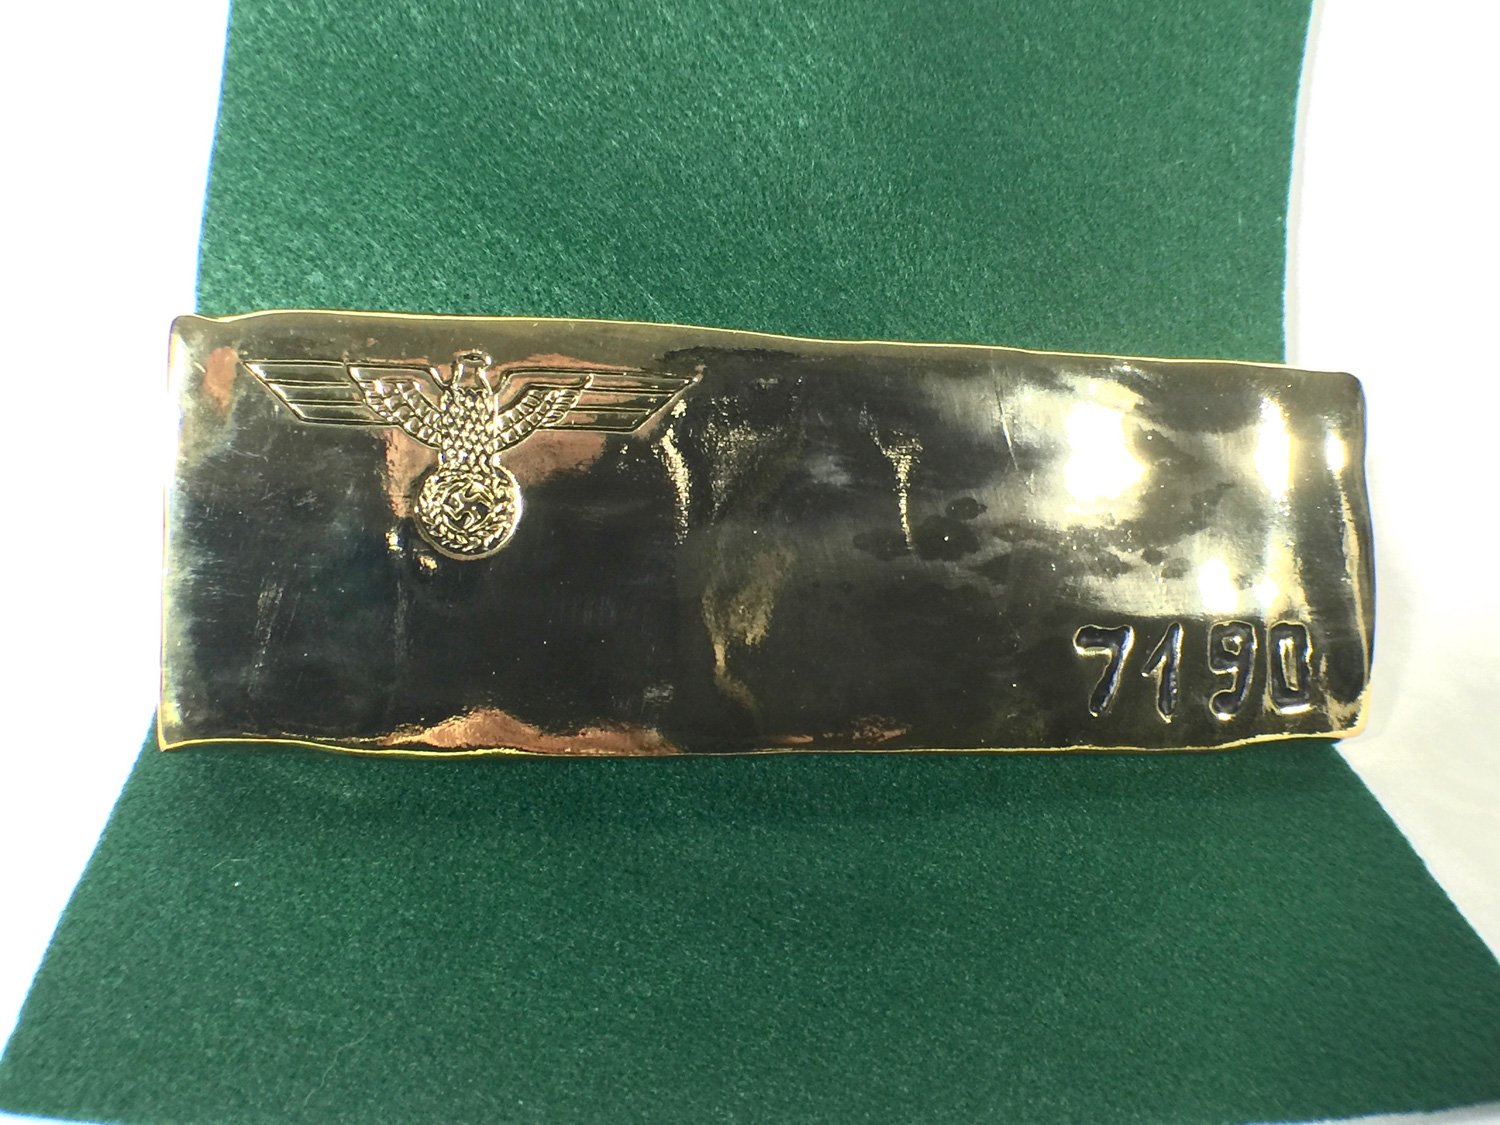 Limited edition gold bar